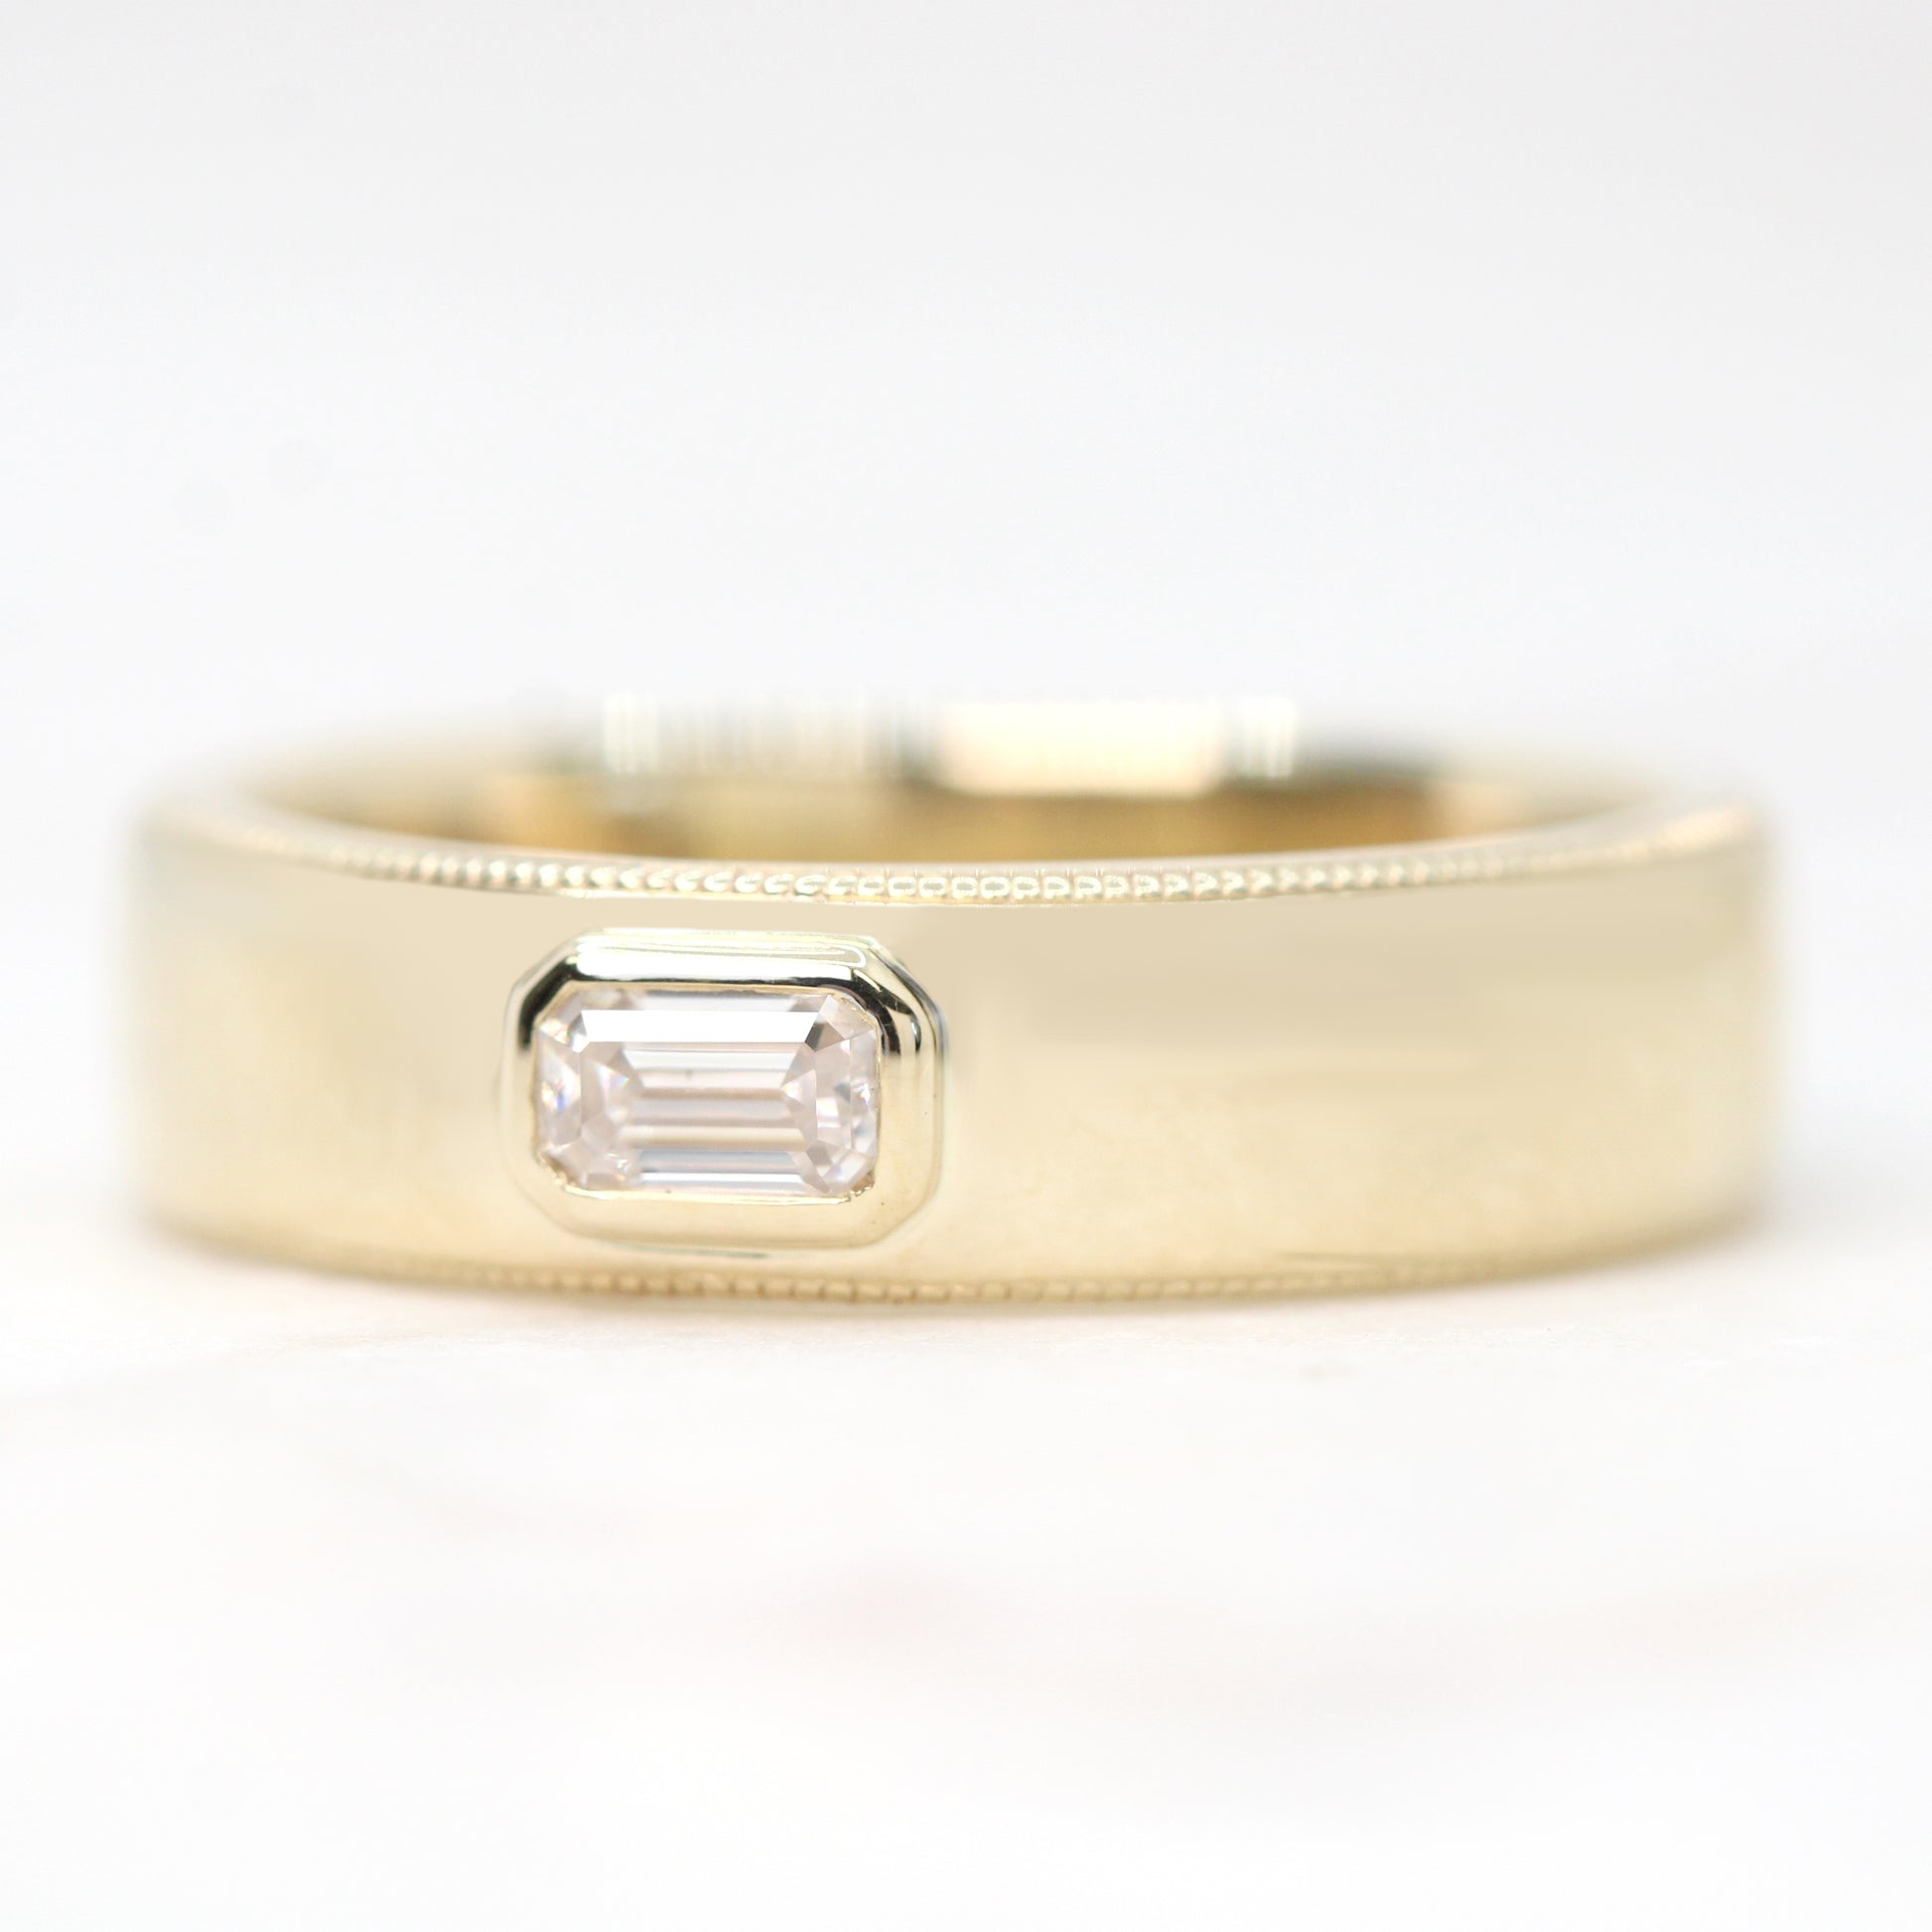 Samantha - Erik Band - Unisex Wedding Band - Made to Order, Choose Your Gold Tone - Midwinter Co. Alternative Bridal Rings and Modern Fine Jewelry